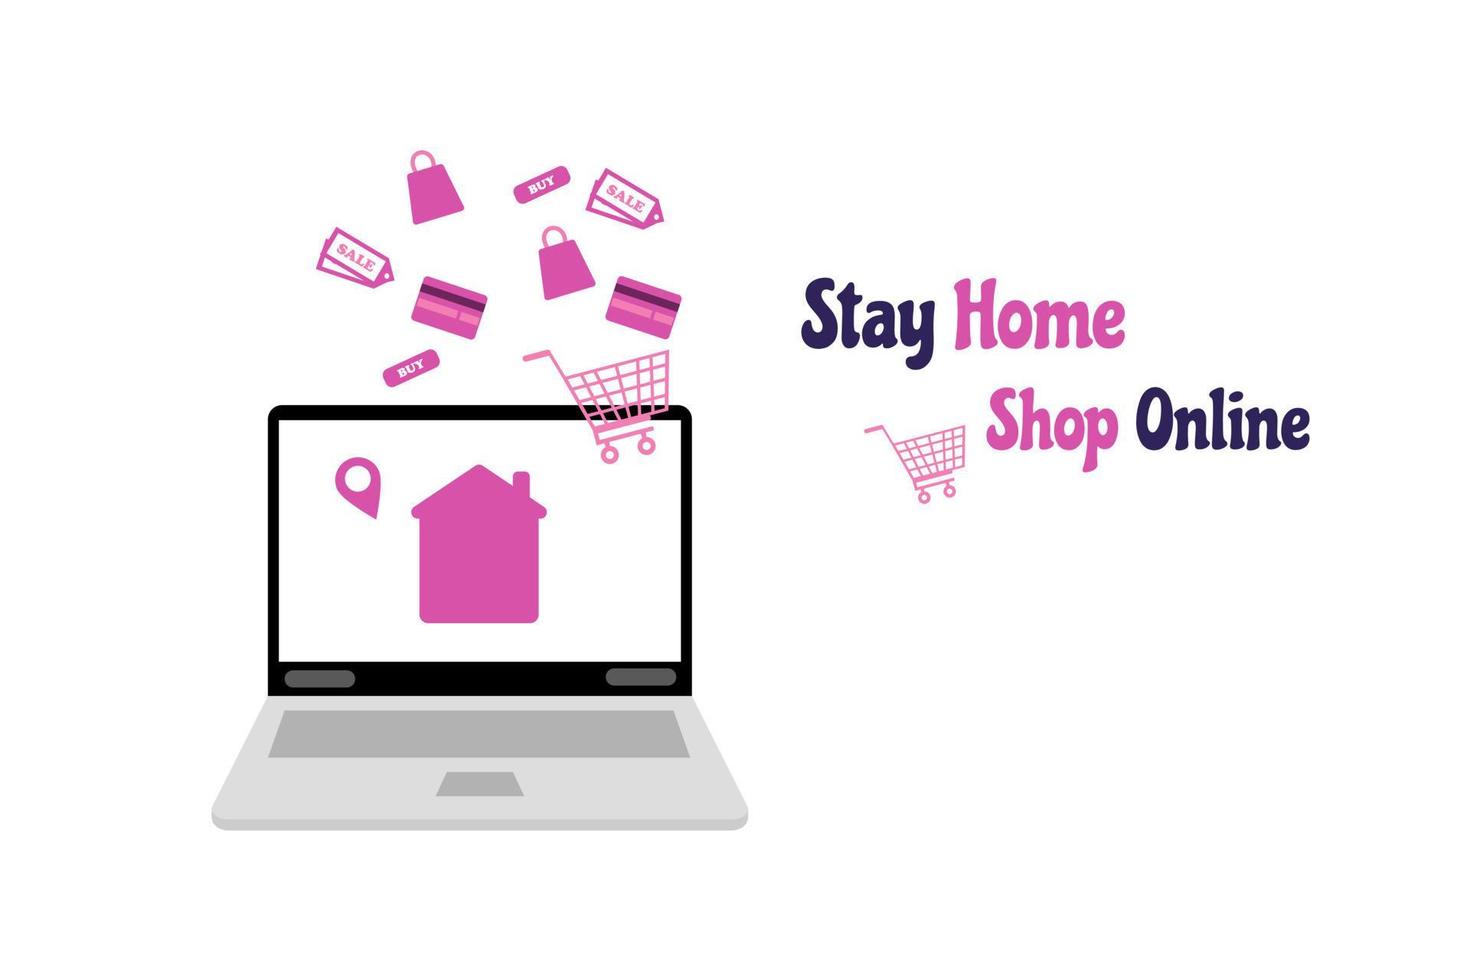 Stay home and shop online concept. Pink house on screen of laptop, creadit card, shopping cart and bag, on white background. Quarantine to save life from corona virus. vector